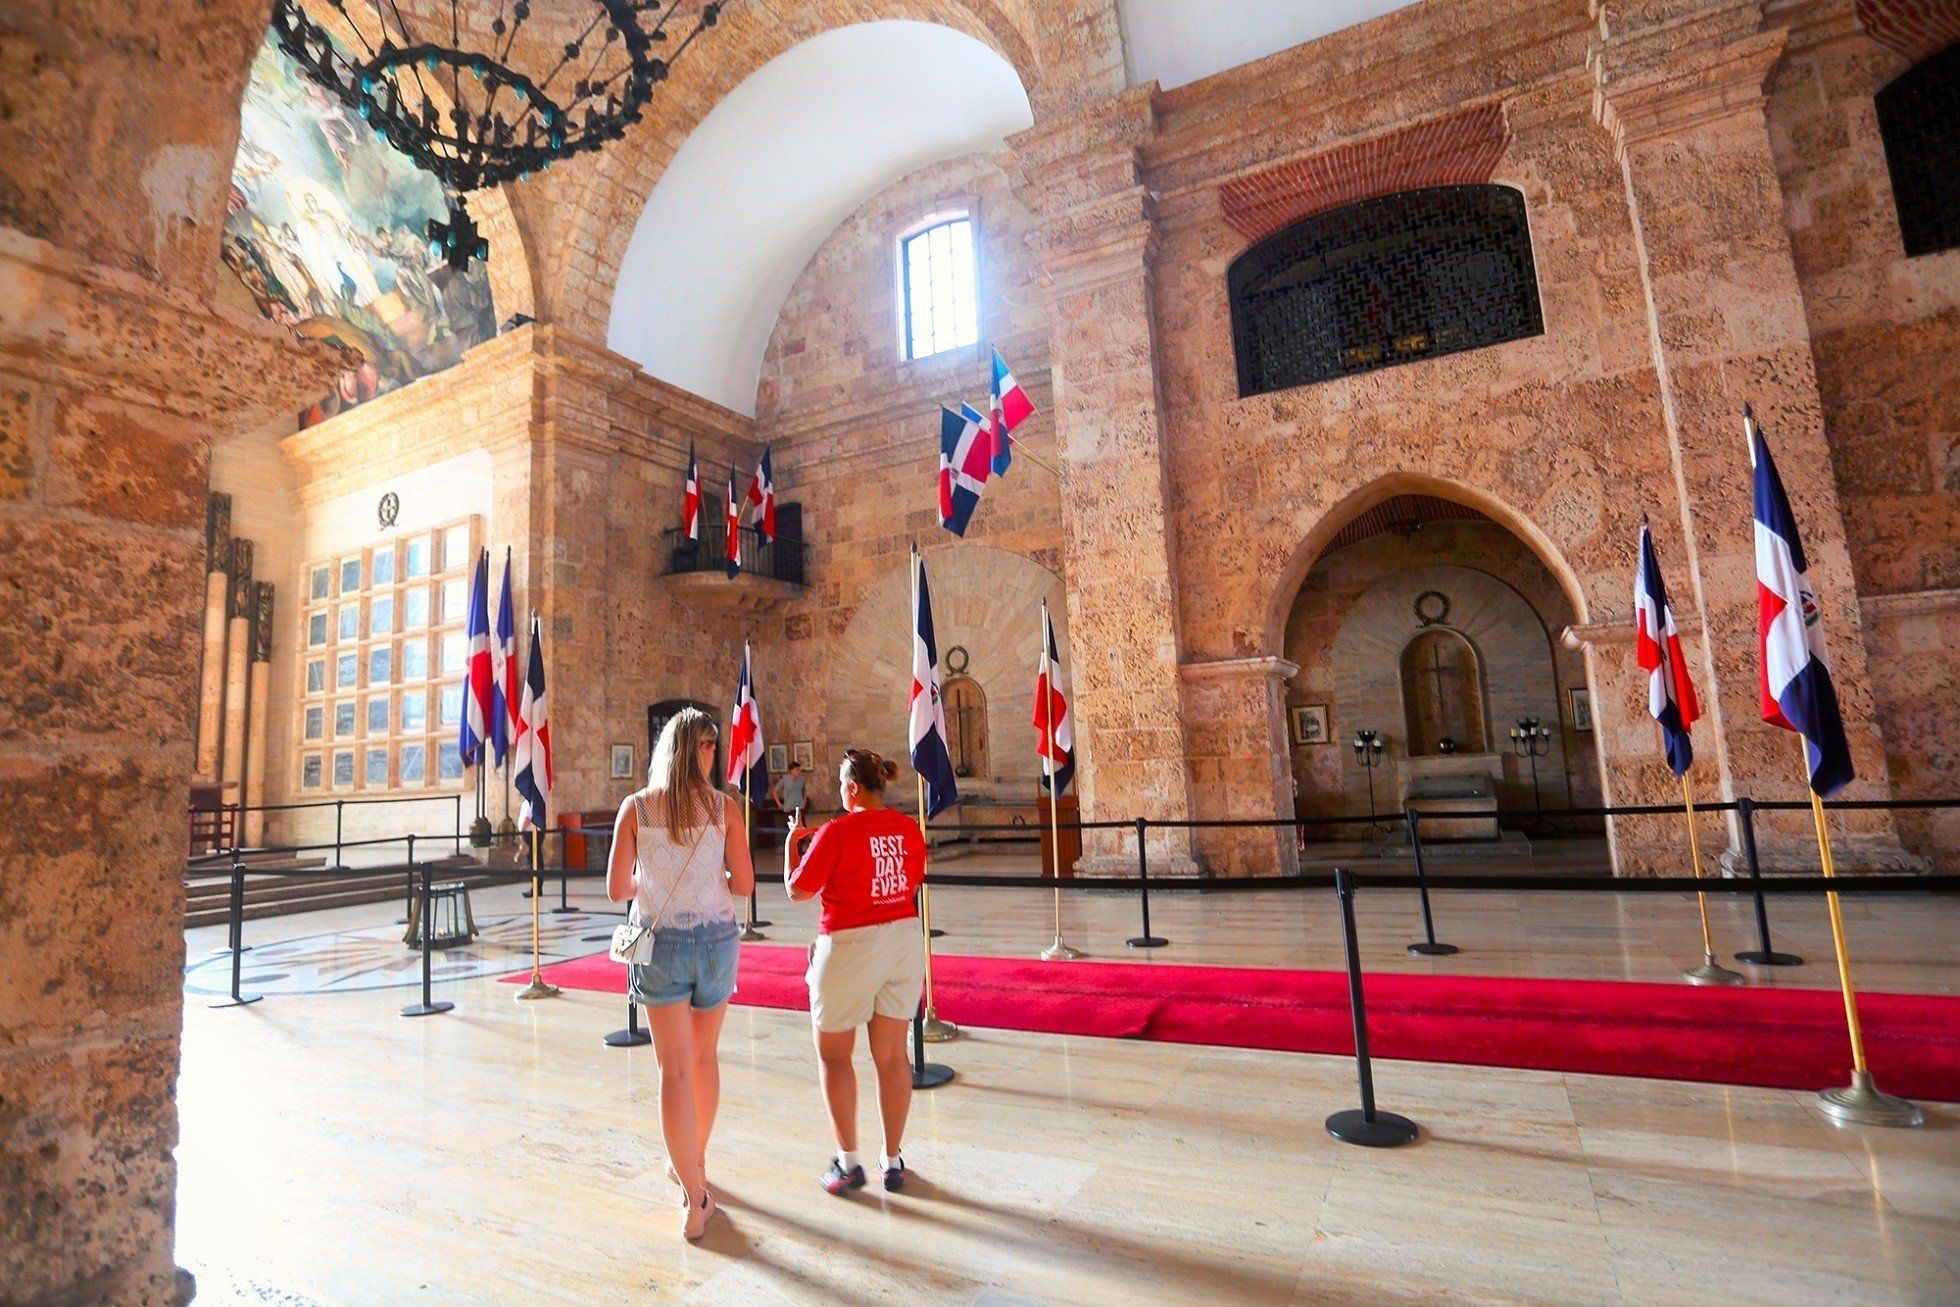 10 Top Things To Do In Santo Domingo 2021 Attraction And Activity Guide